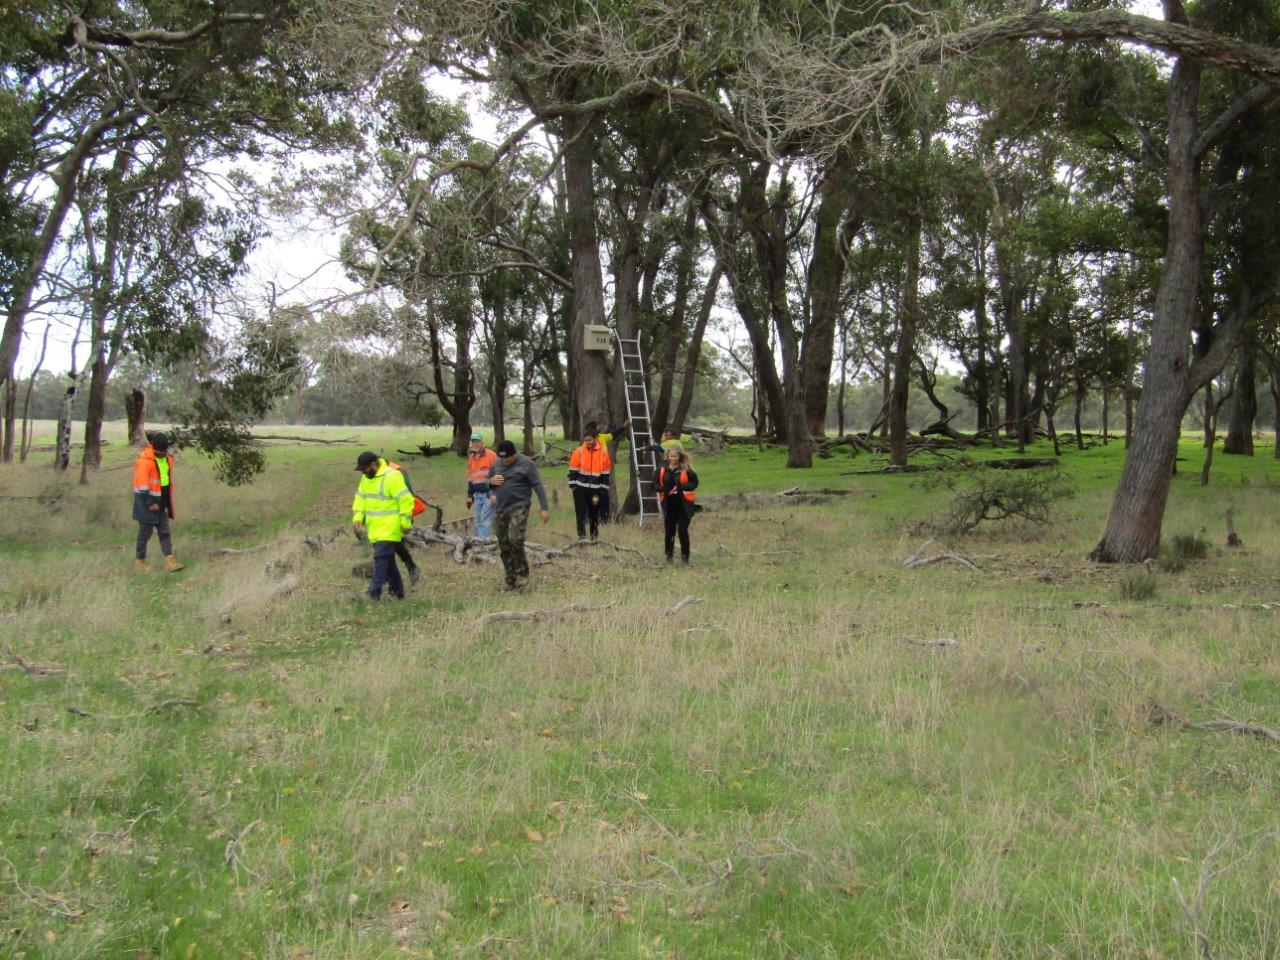 Group of people in high vis jackets walking through a paddock with trees in the background